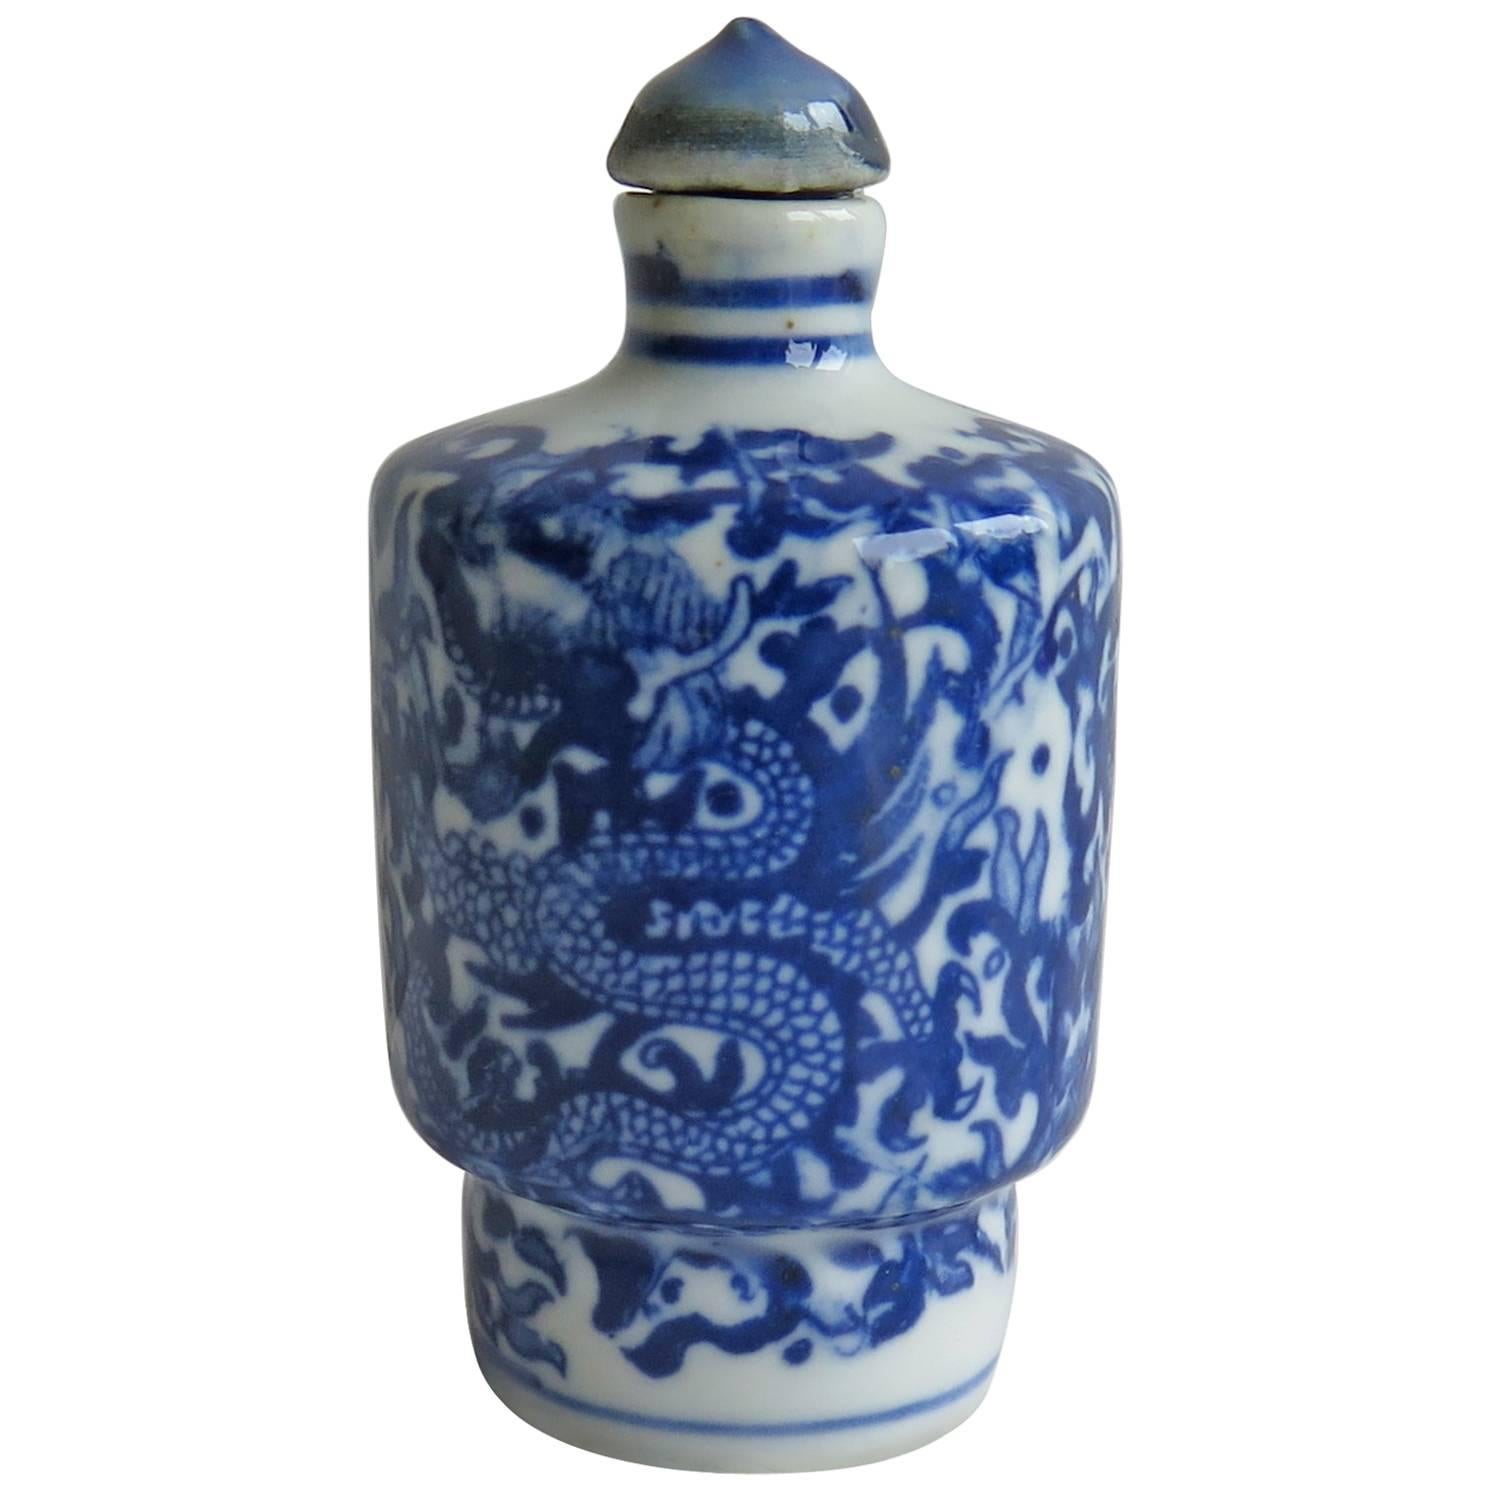 Chinese Porcelain Snuff Bottle Blue and White Hand-Painted Dragons, circa 1925